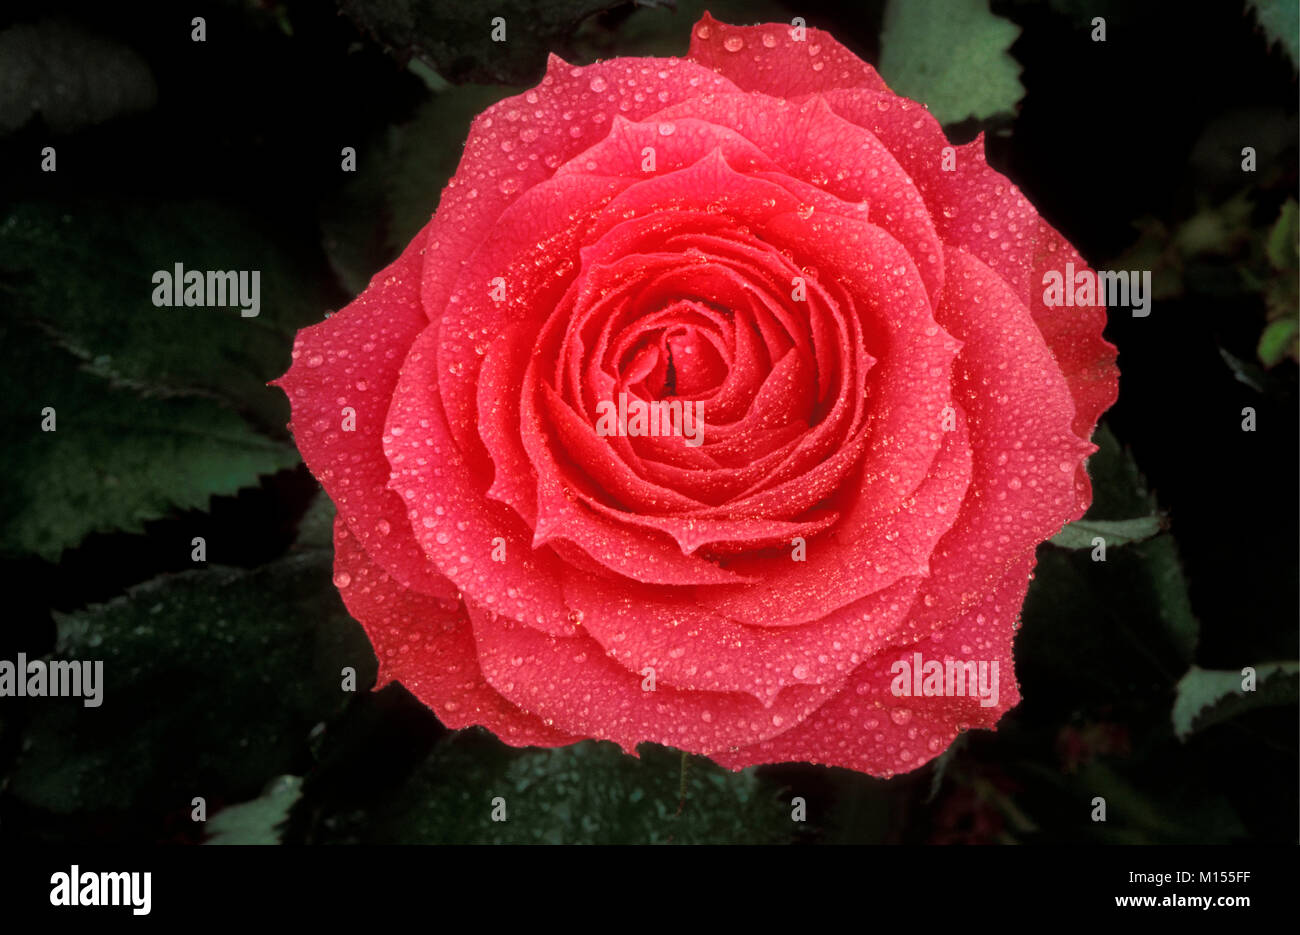 The Netherlands. Lisse. Rose. Dewdrops. Stock Photo